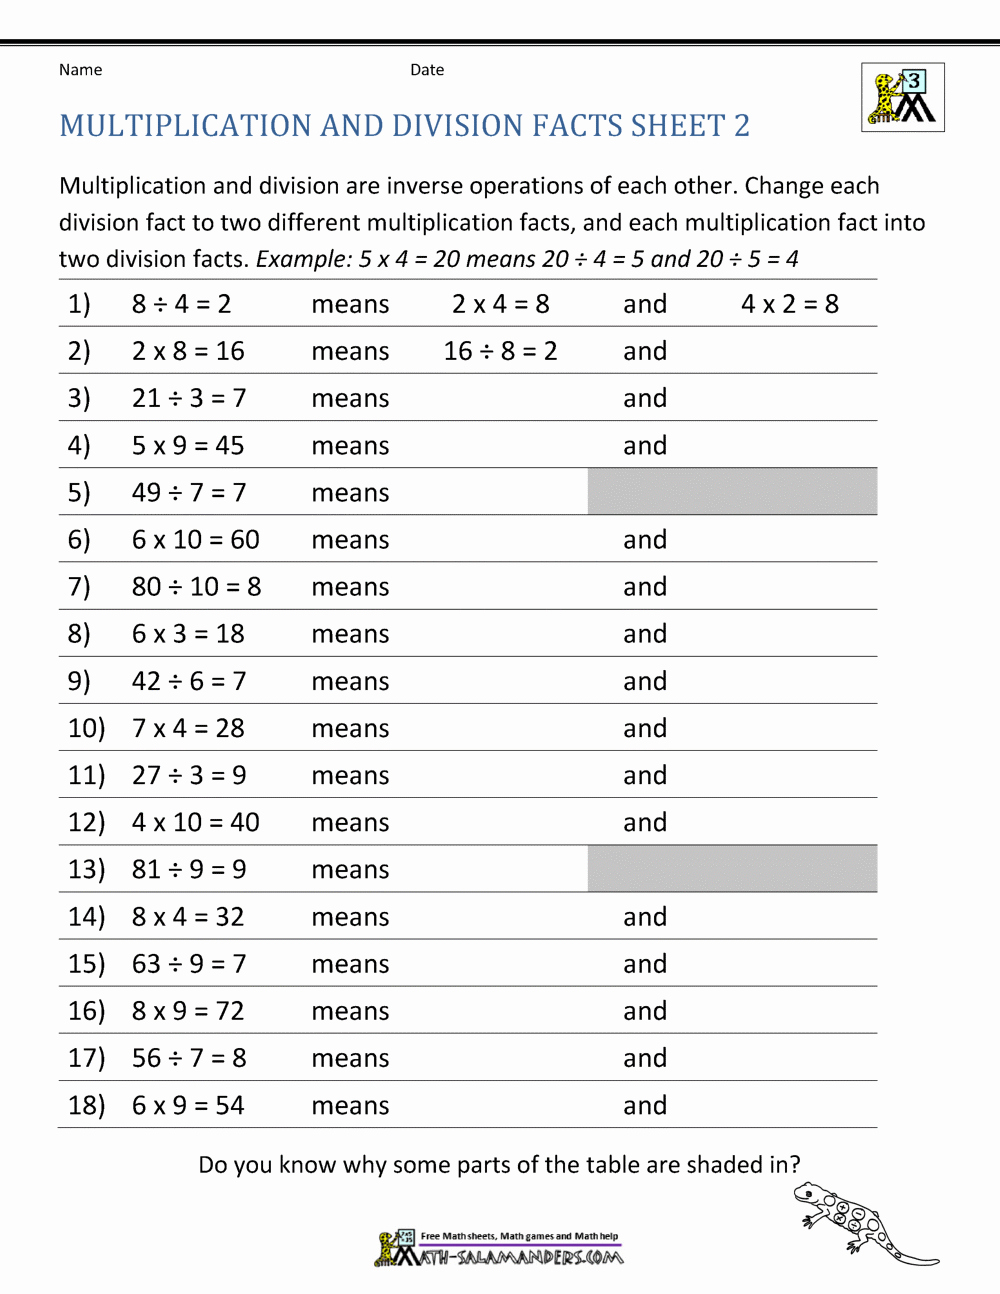 Multiplication and Division Worksheets Unique Multiplication Facts Worksheets Understanding